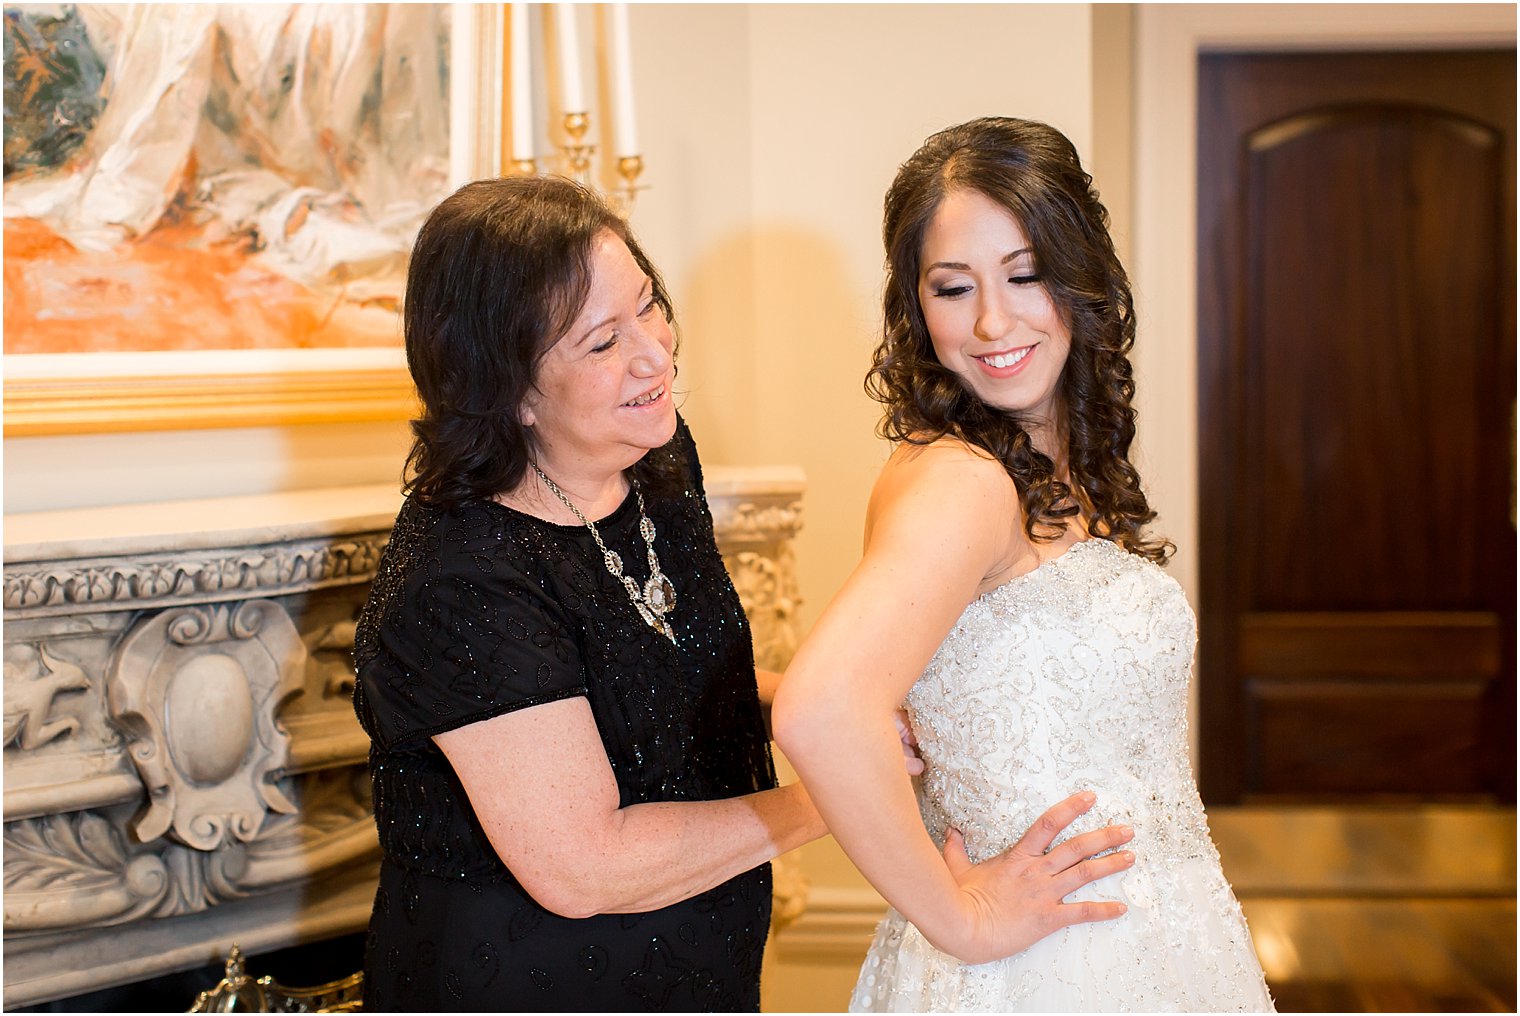 Bride getting ready with her mother | Photo by Idalia Photography